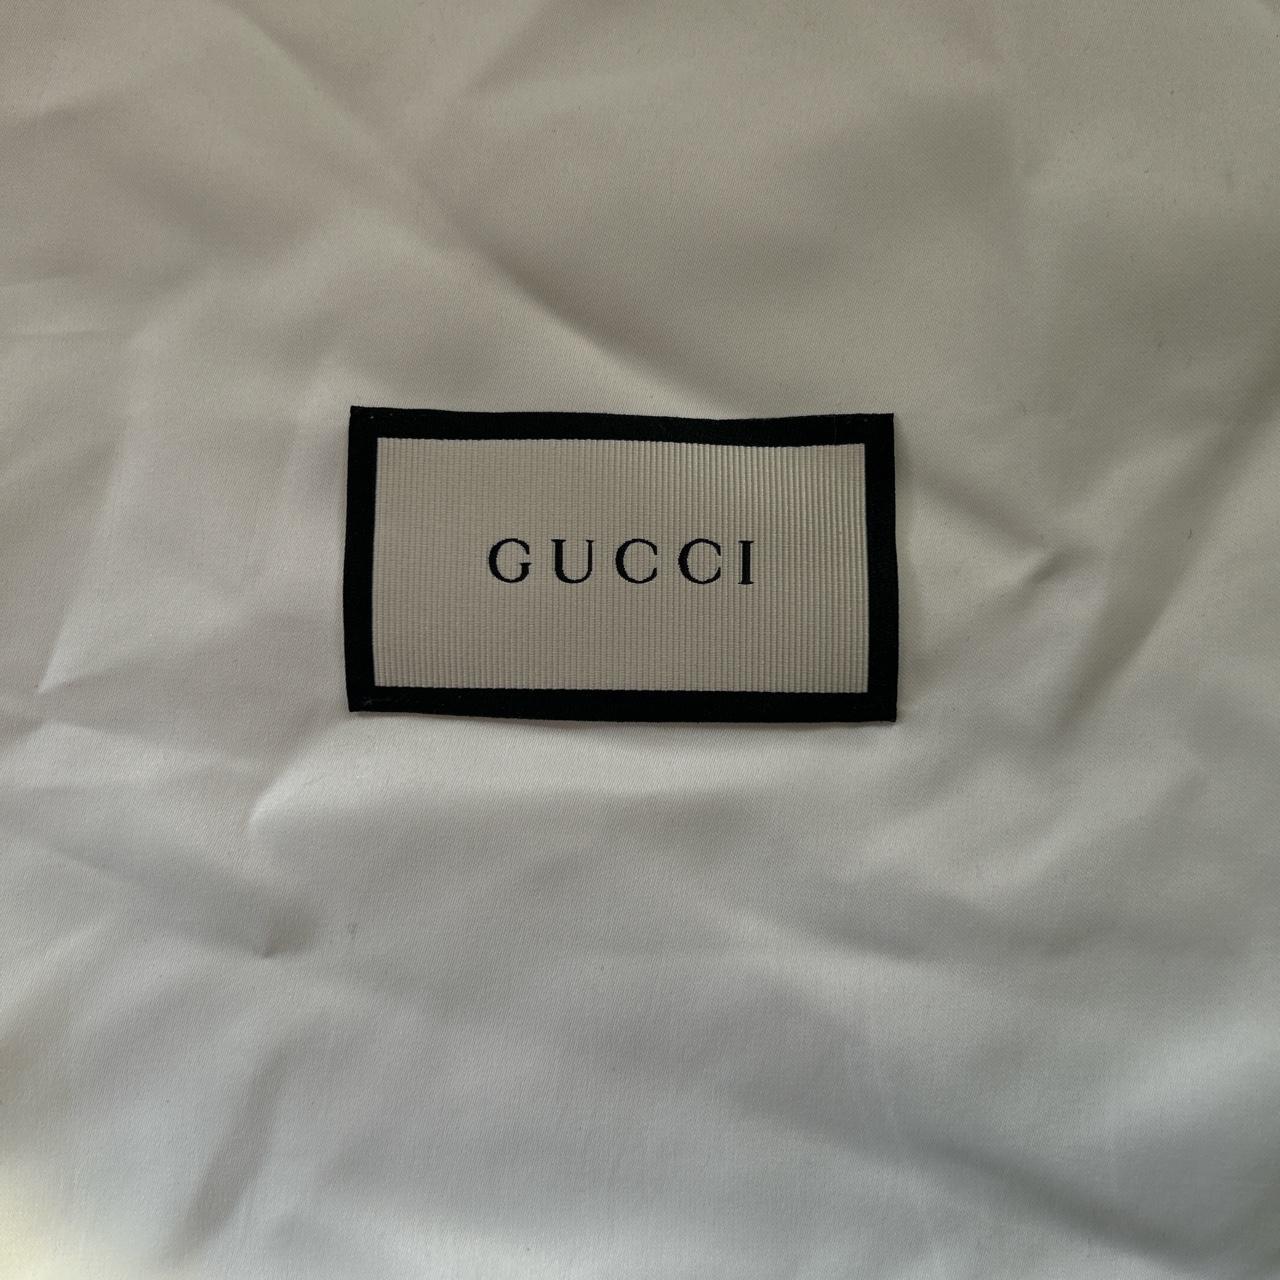 Gucci dust bag -Good condition -Comes without the - Depop